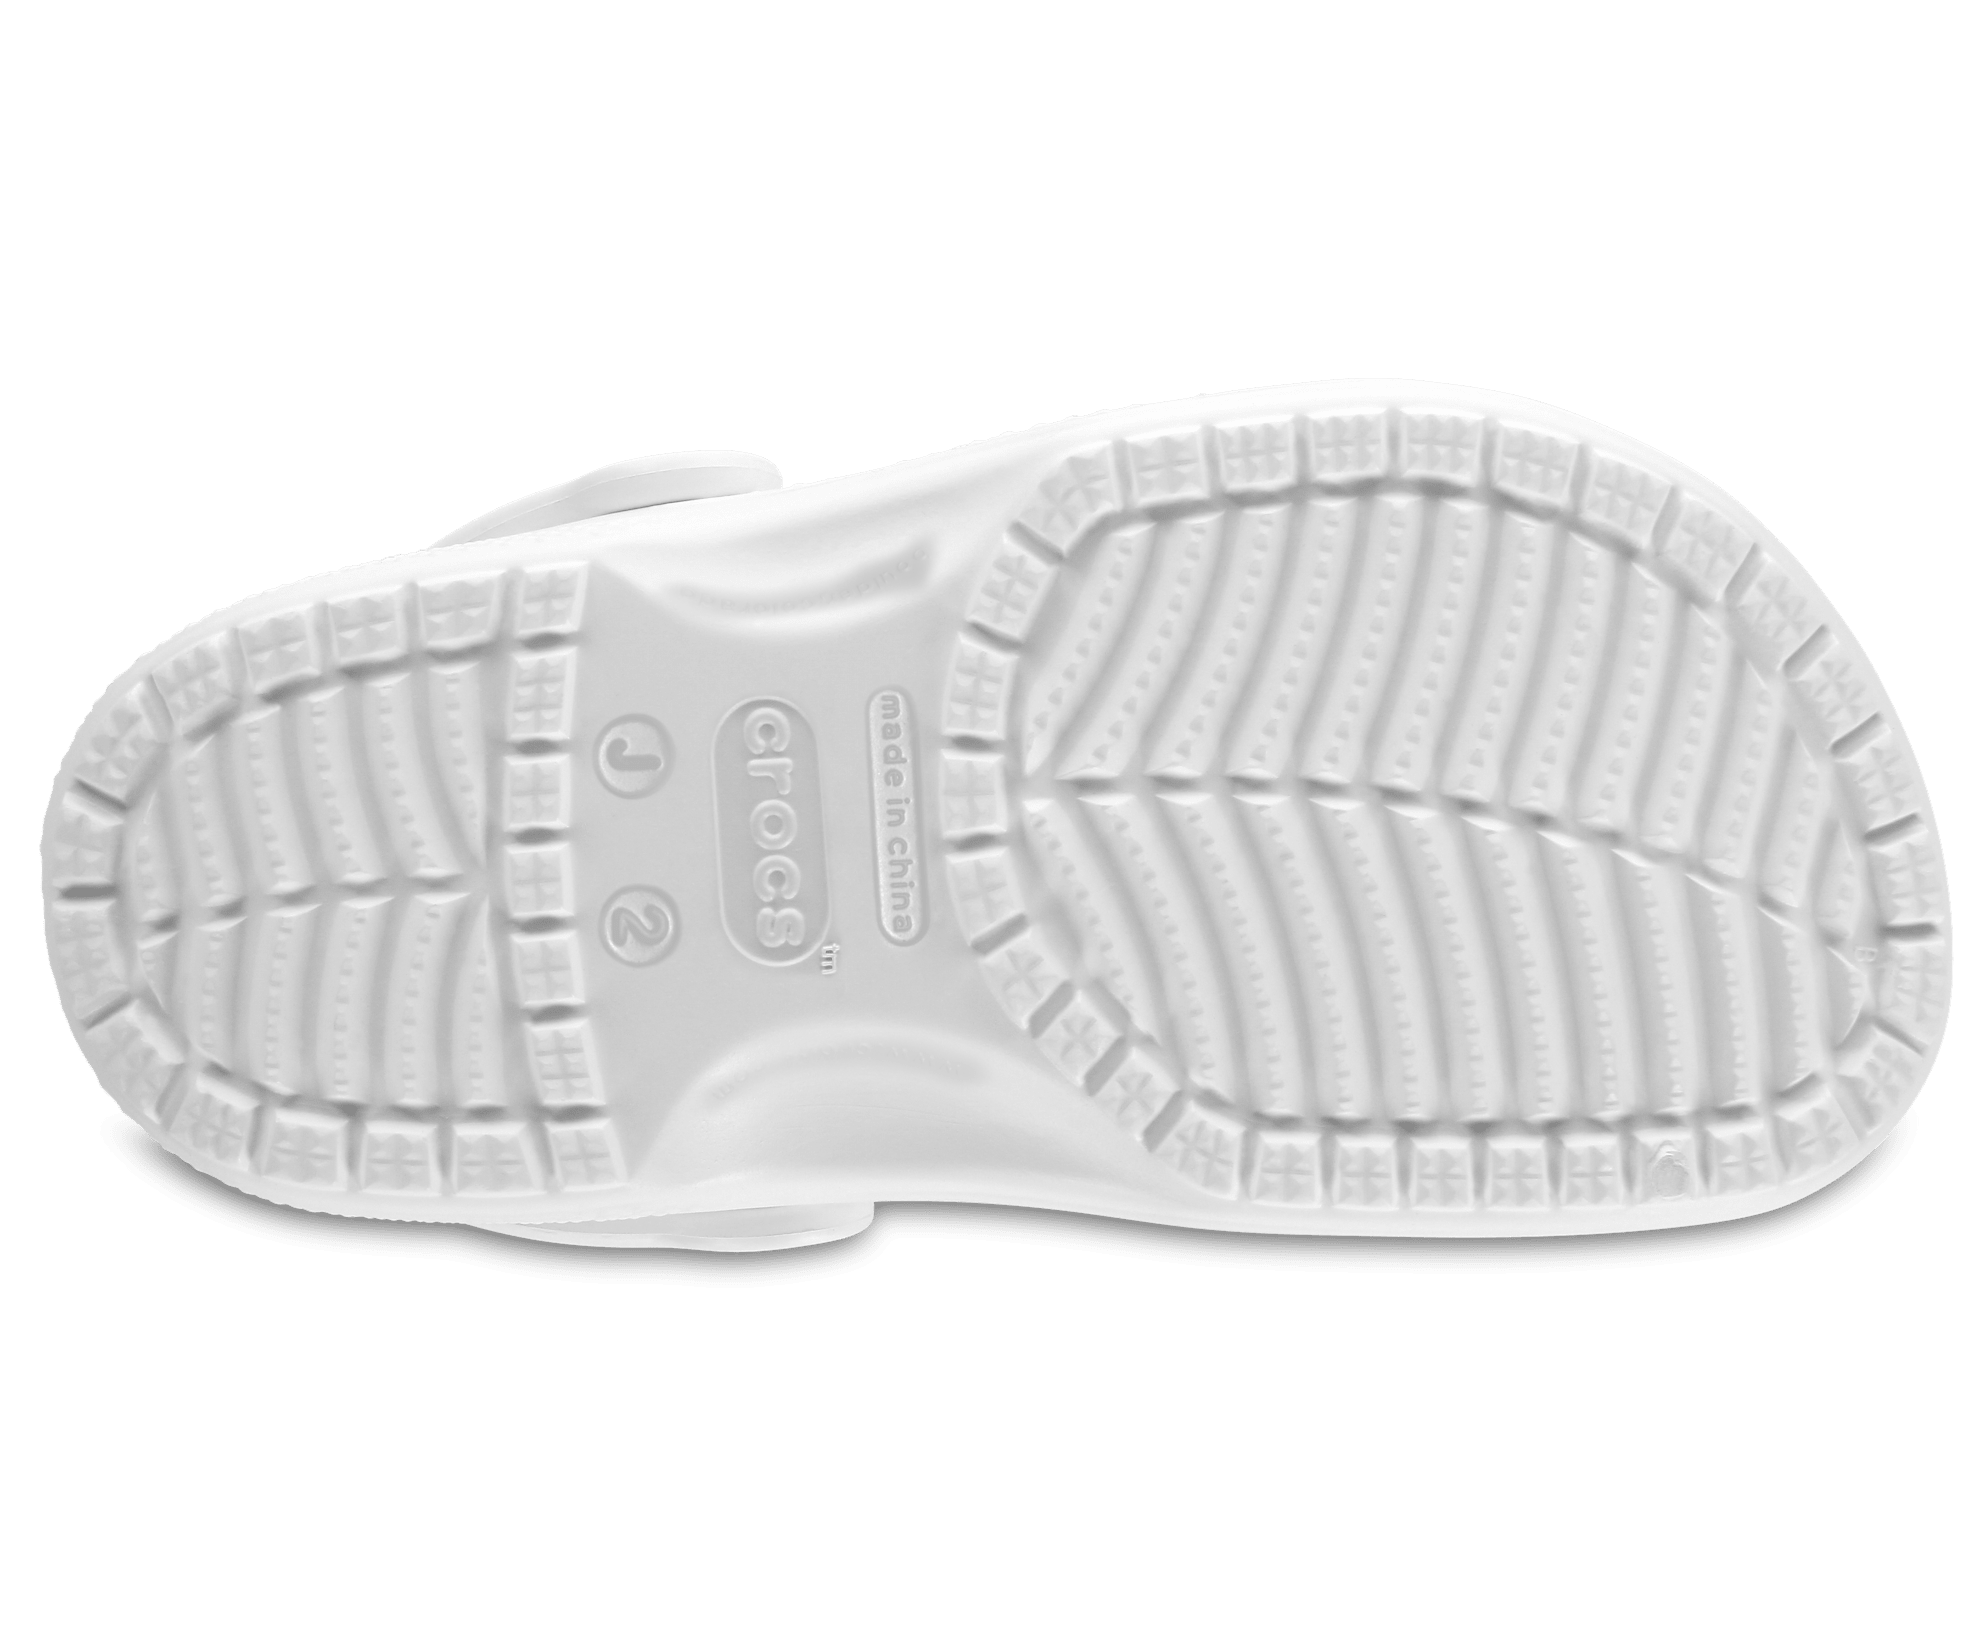 Crocs Kids Classic Clog - White - The Foot Factory